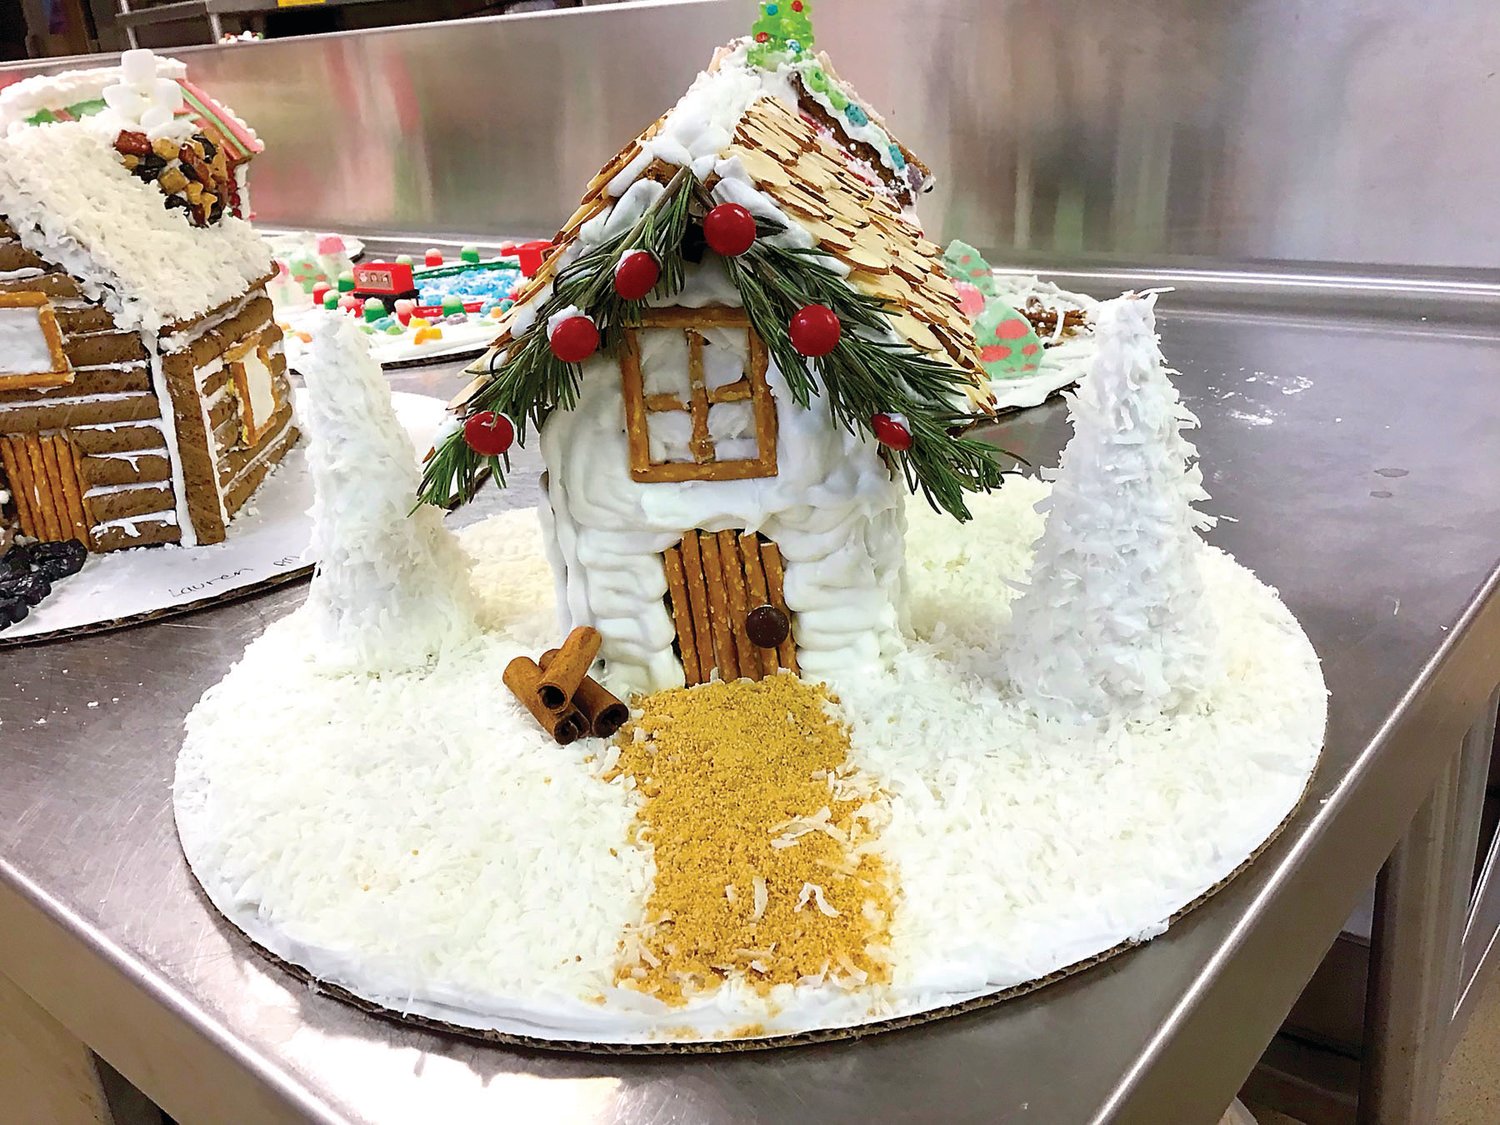 One of the gingerbread houses baked by a Middle Bucks Institute of Technology student.